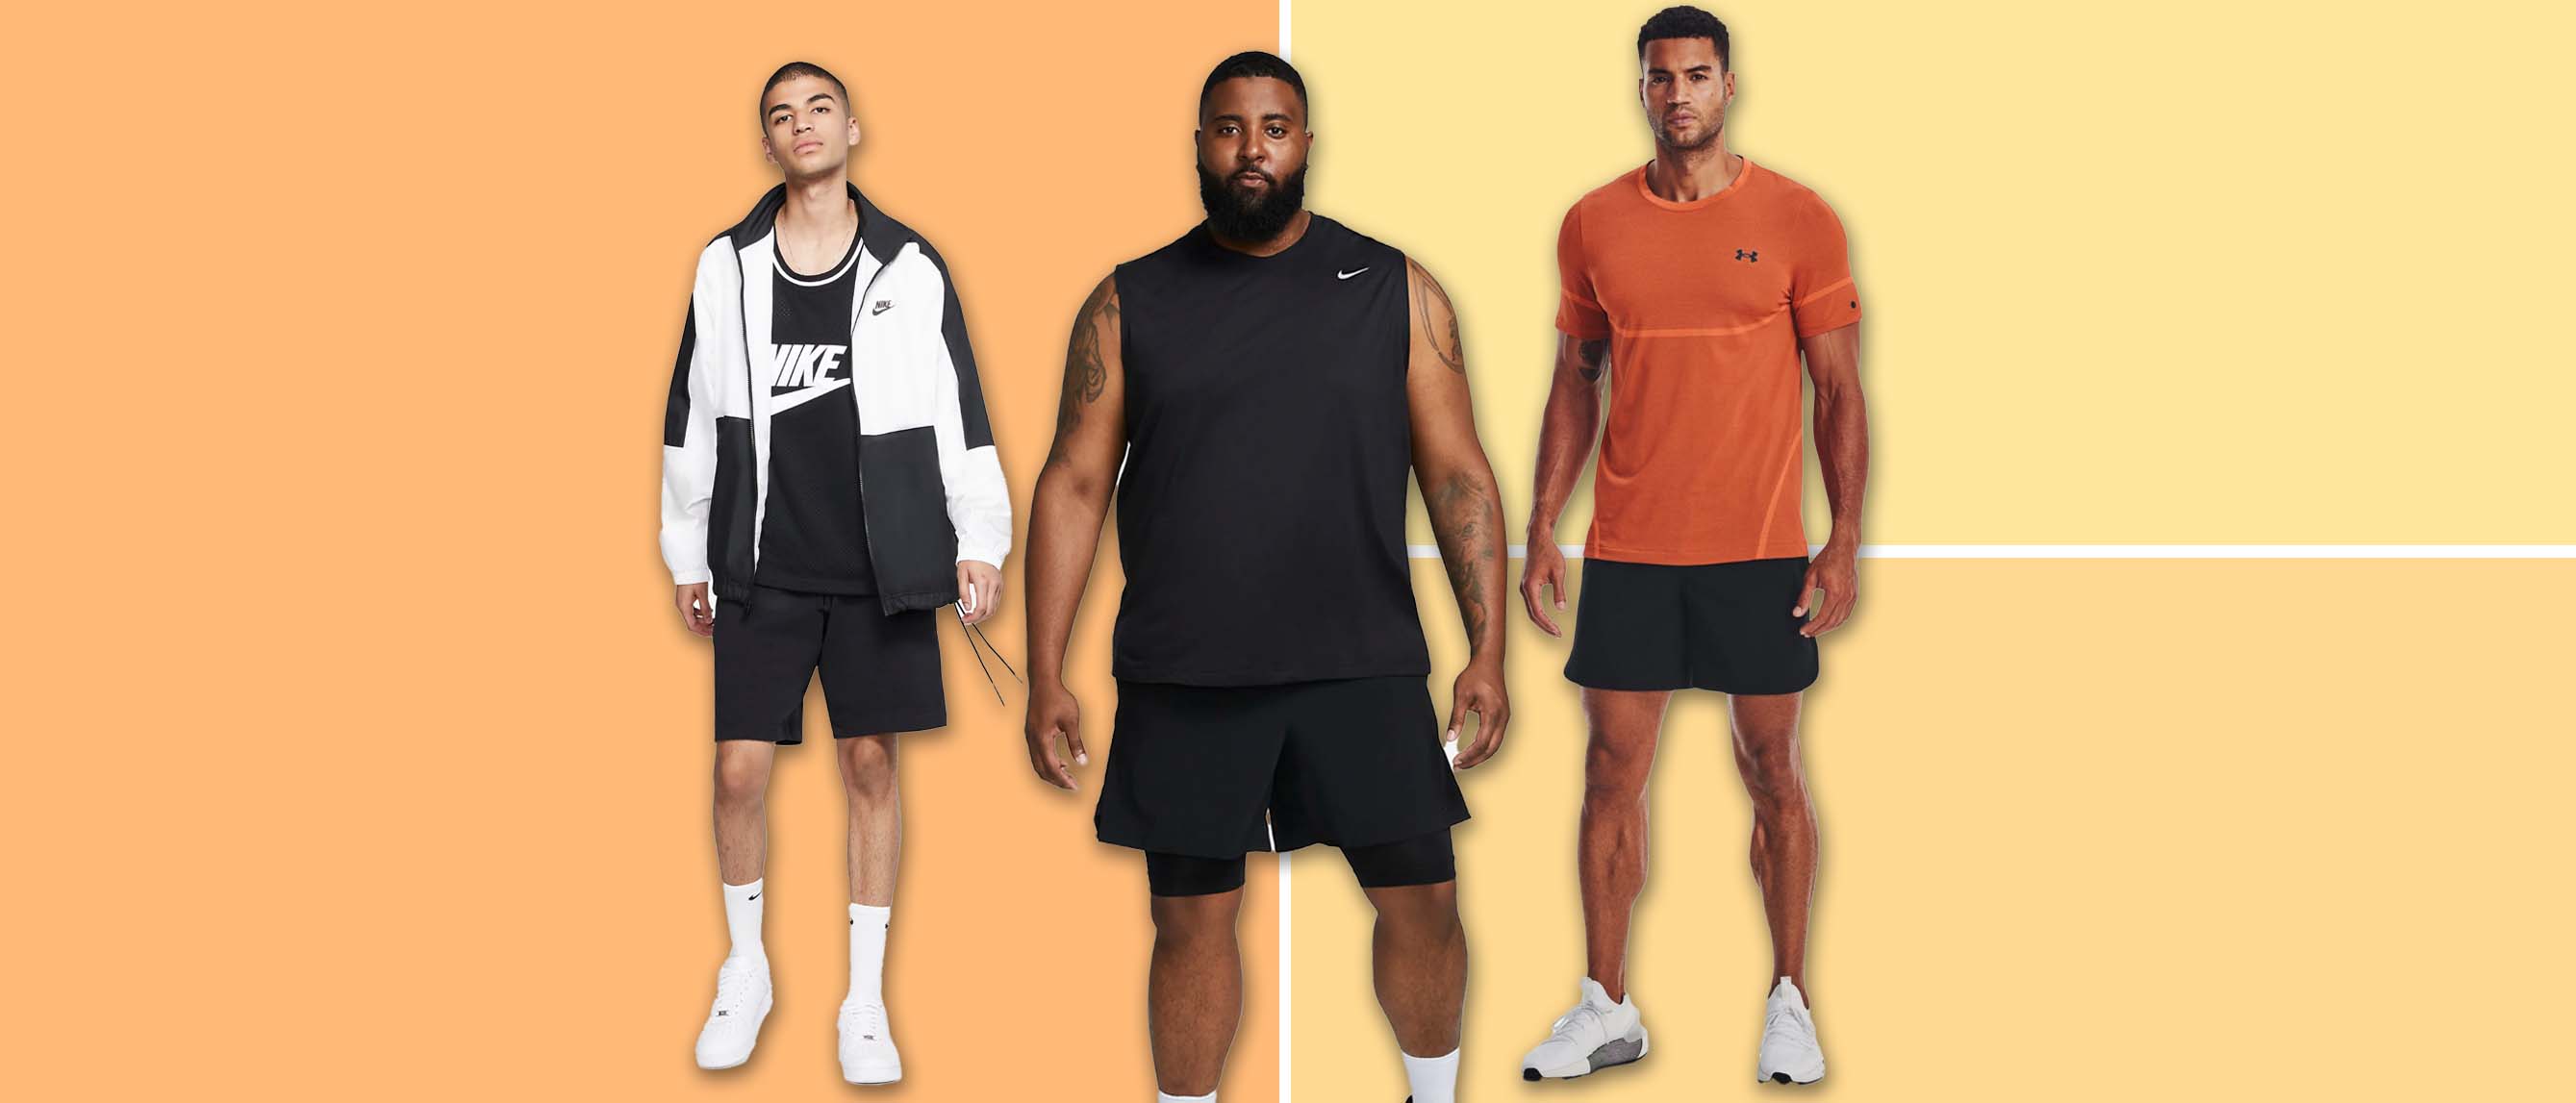 Image of three men wearing gym shorts in different styles